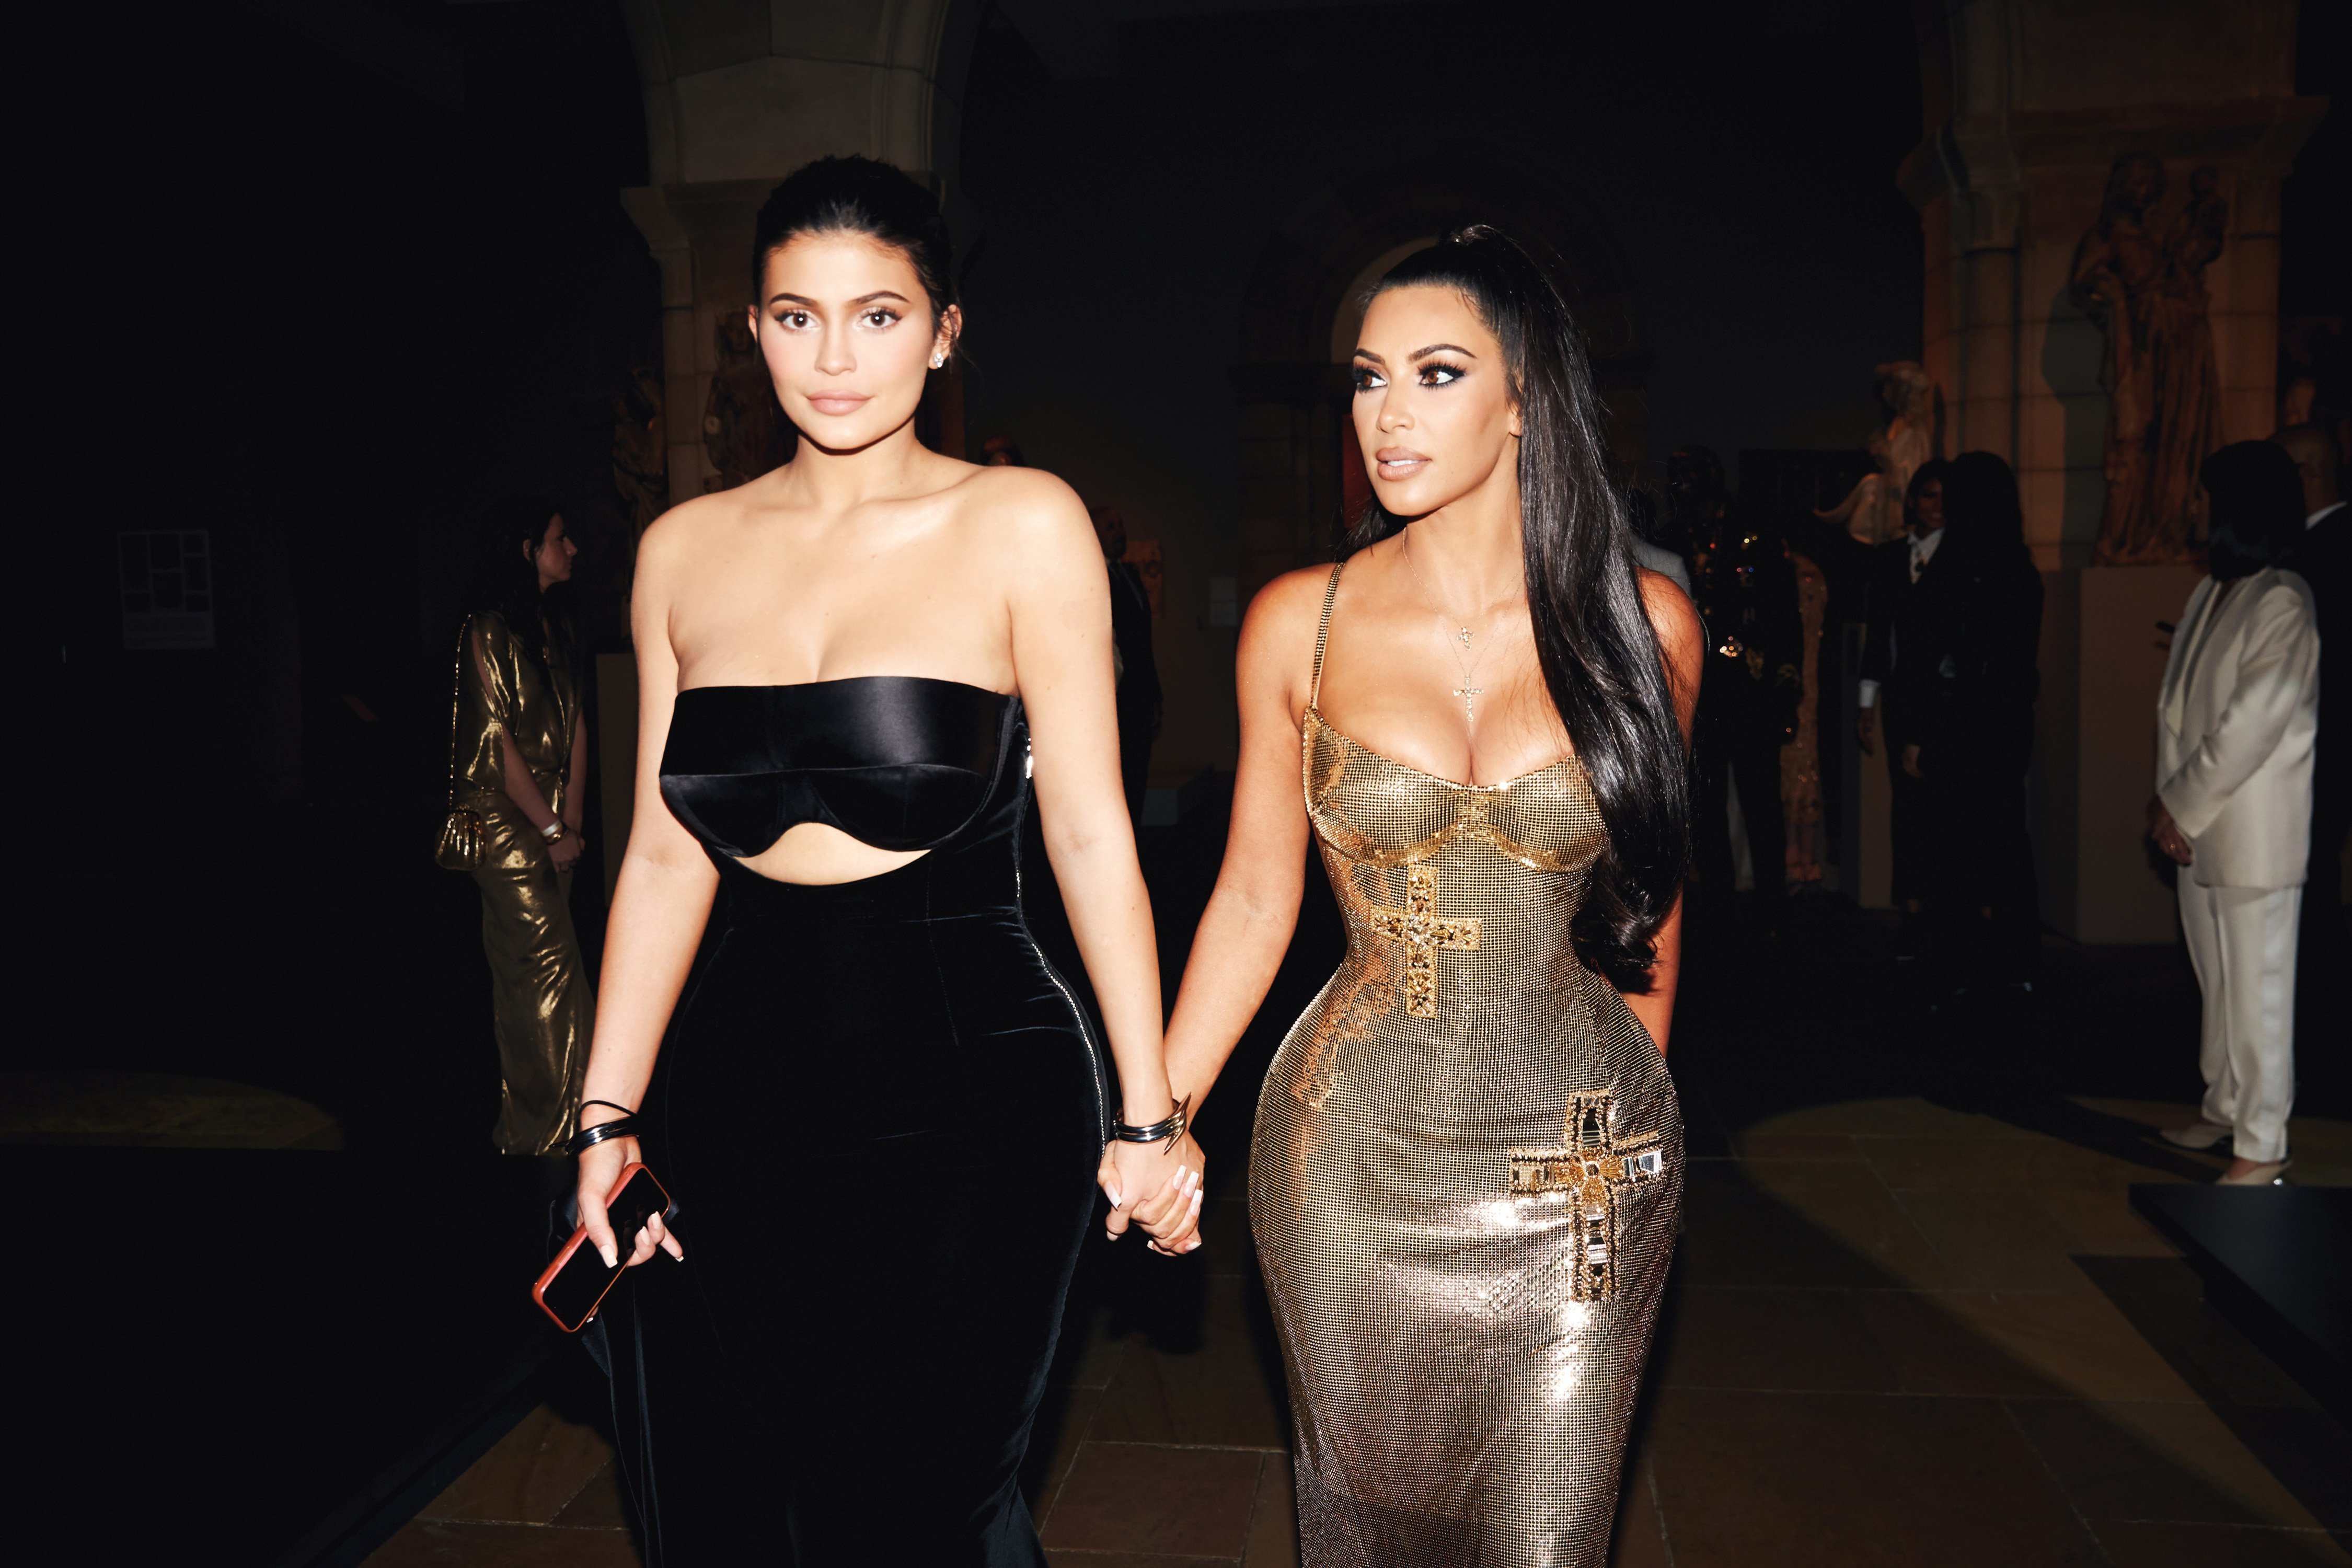 Kylie Jenner and Kim Kardashian West attend Heavenly Bodies: Fashion & The Catholic Imagination Costume Institute Gala | Source: Getty Images